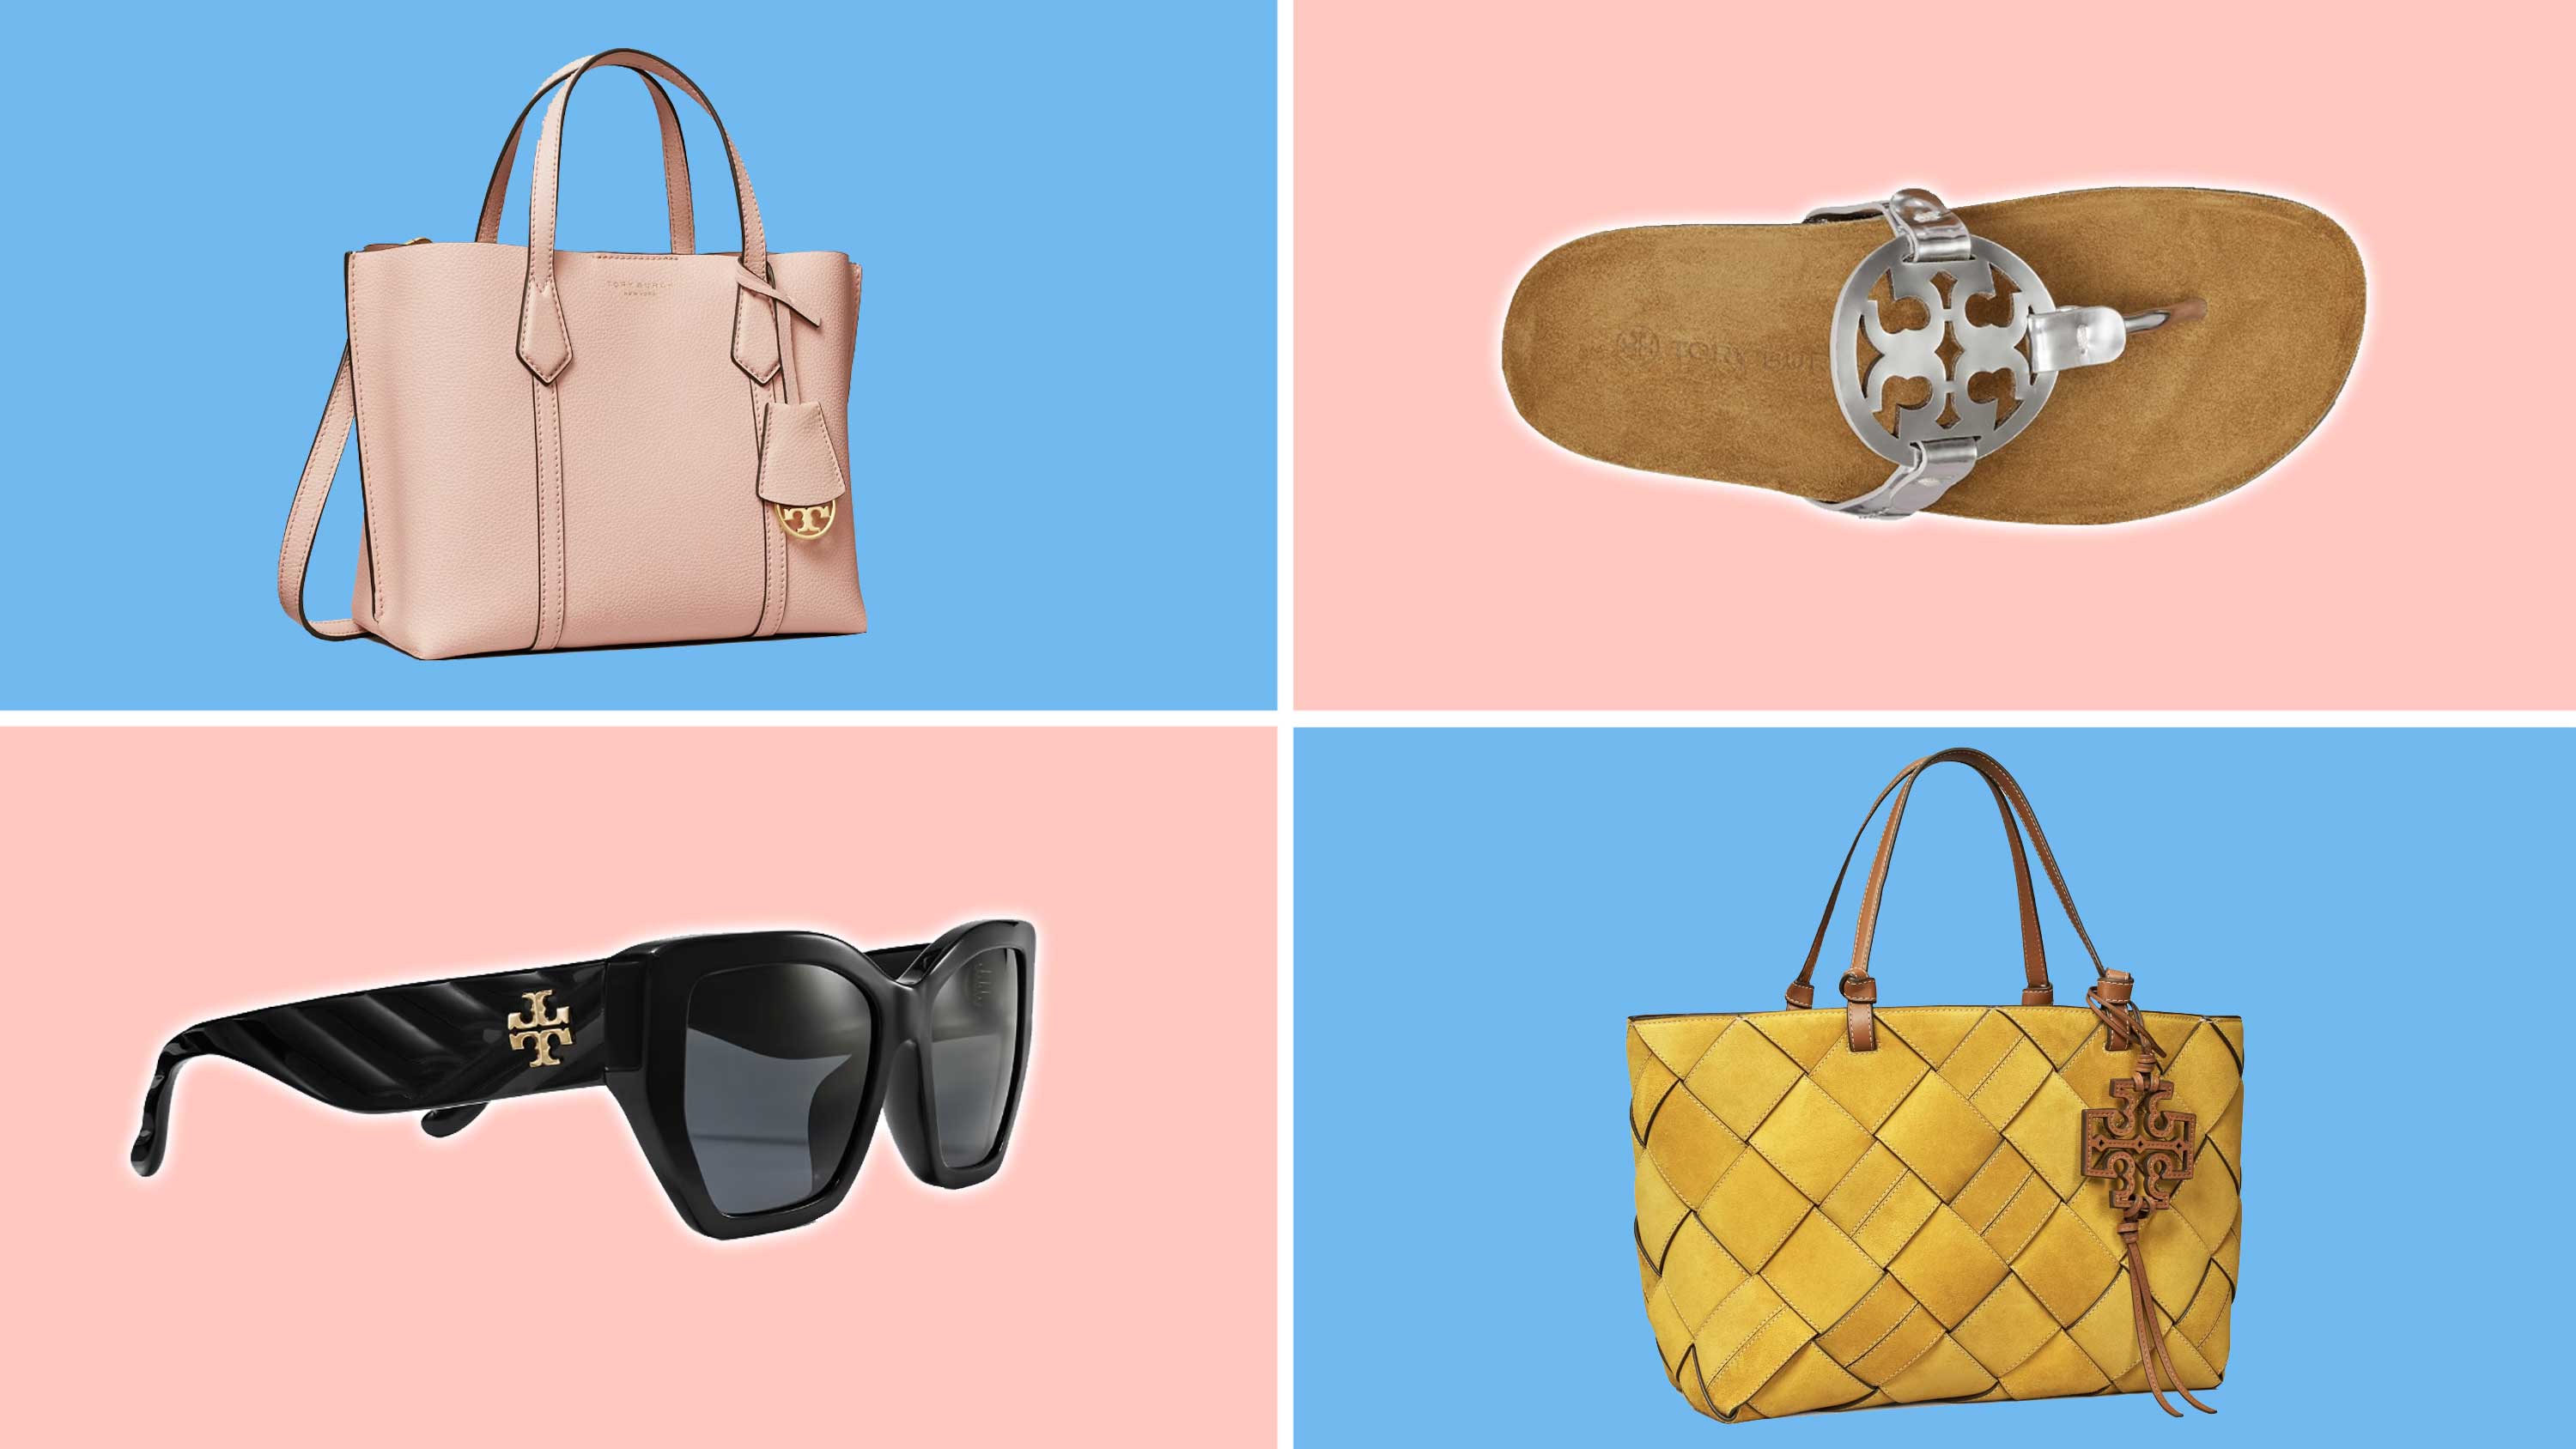 Tory Burch sale: Save $169 on Tory Burch Miller Cloud sandals today